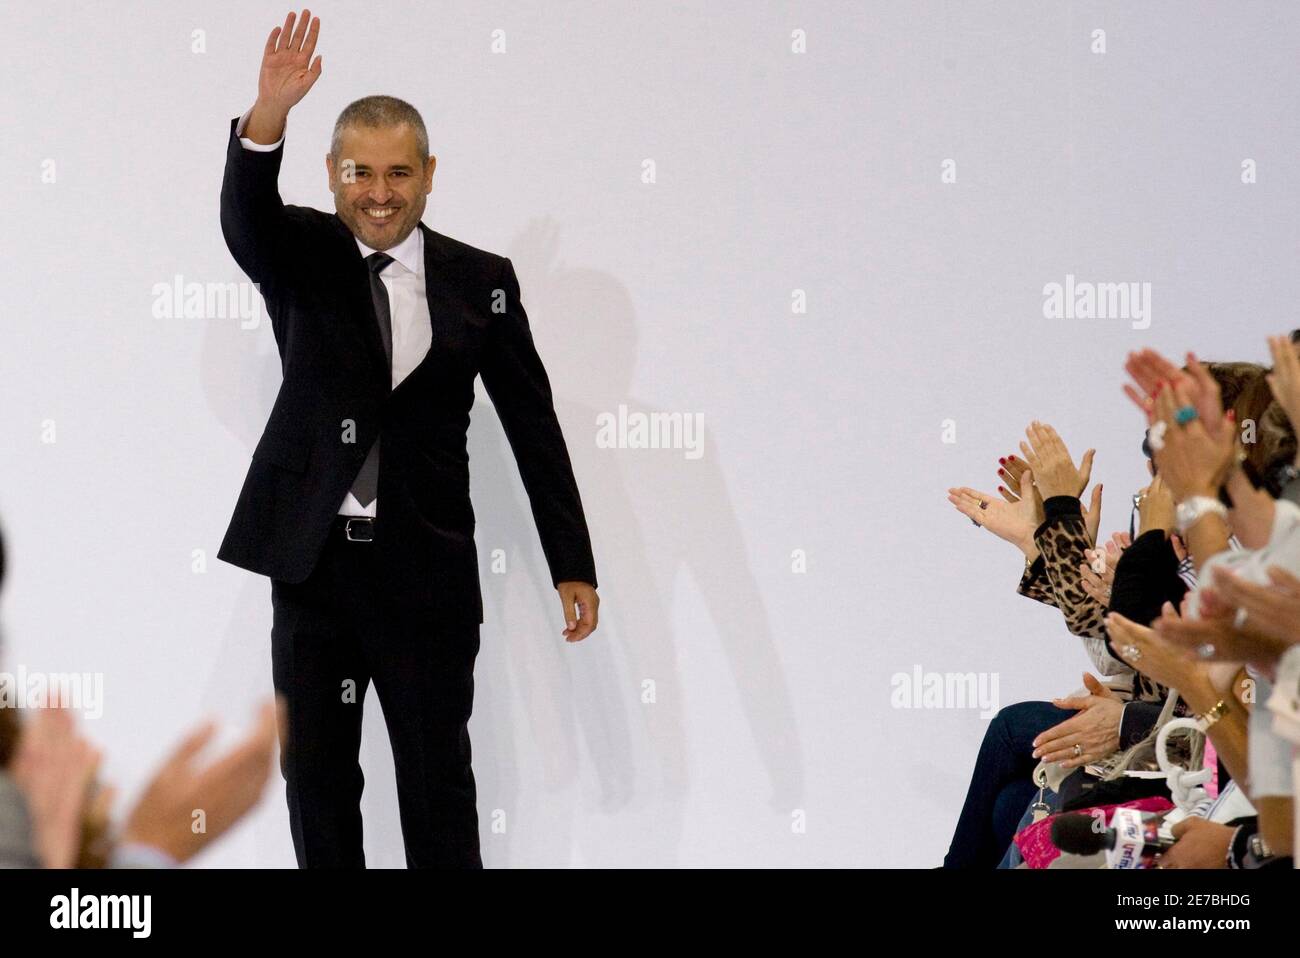 Lebanese designer Elie Saab appears at the end of his Autumn/Winter 2009-2010 Haute Couture fashion show in Paris July 8, 2009. REUTERS/Pascal Rossignol (FRANCE FASHION) Stock Photo